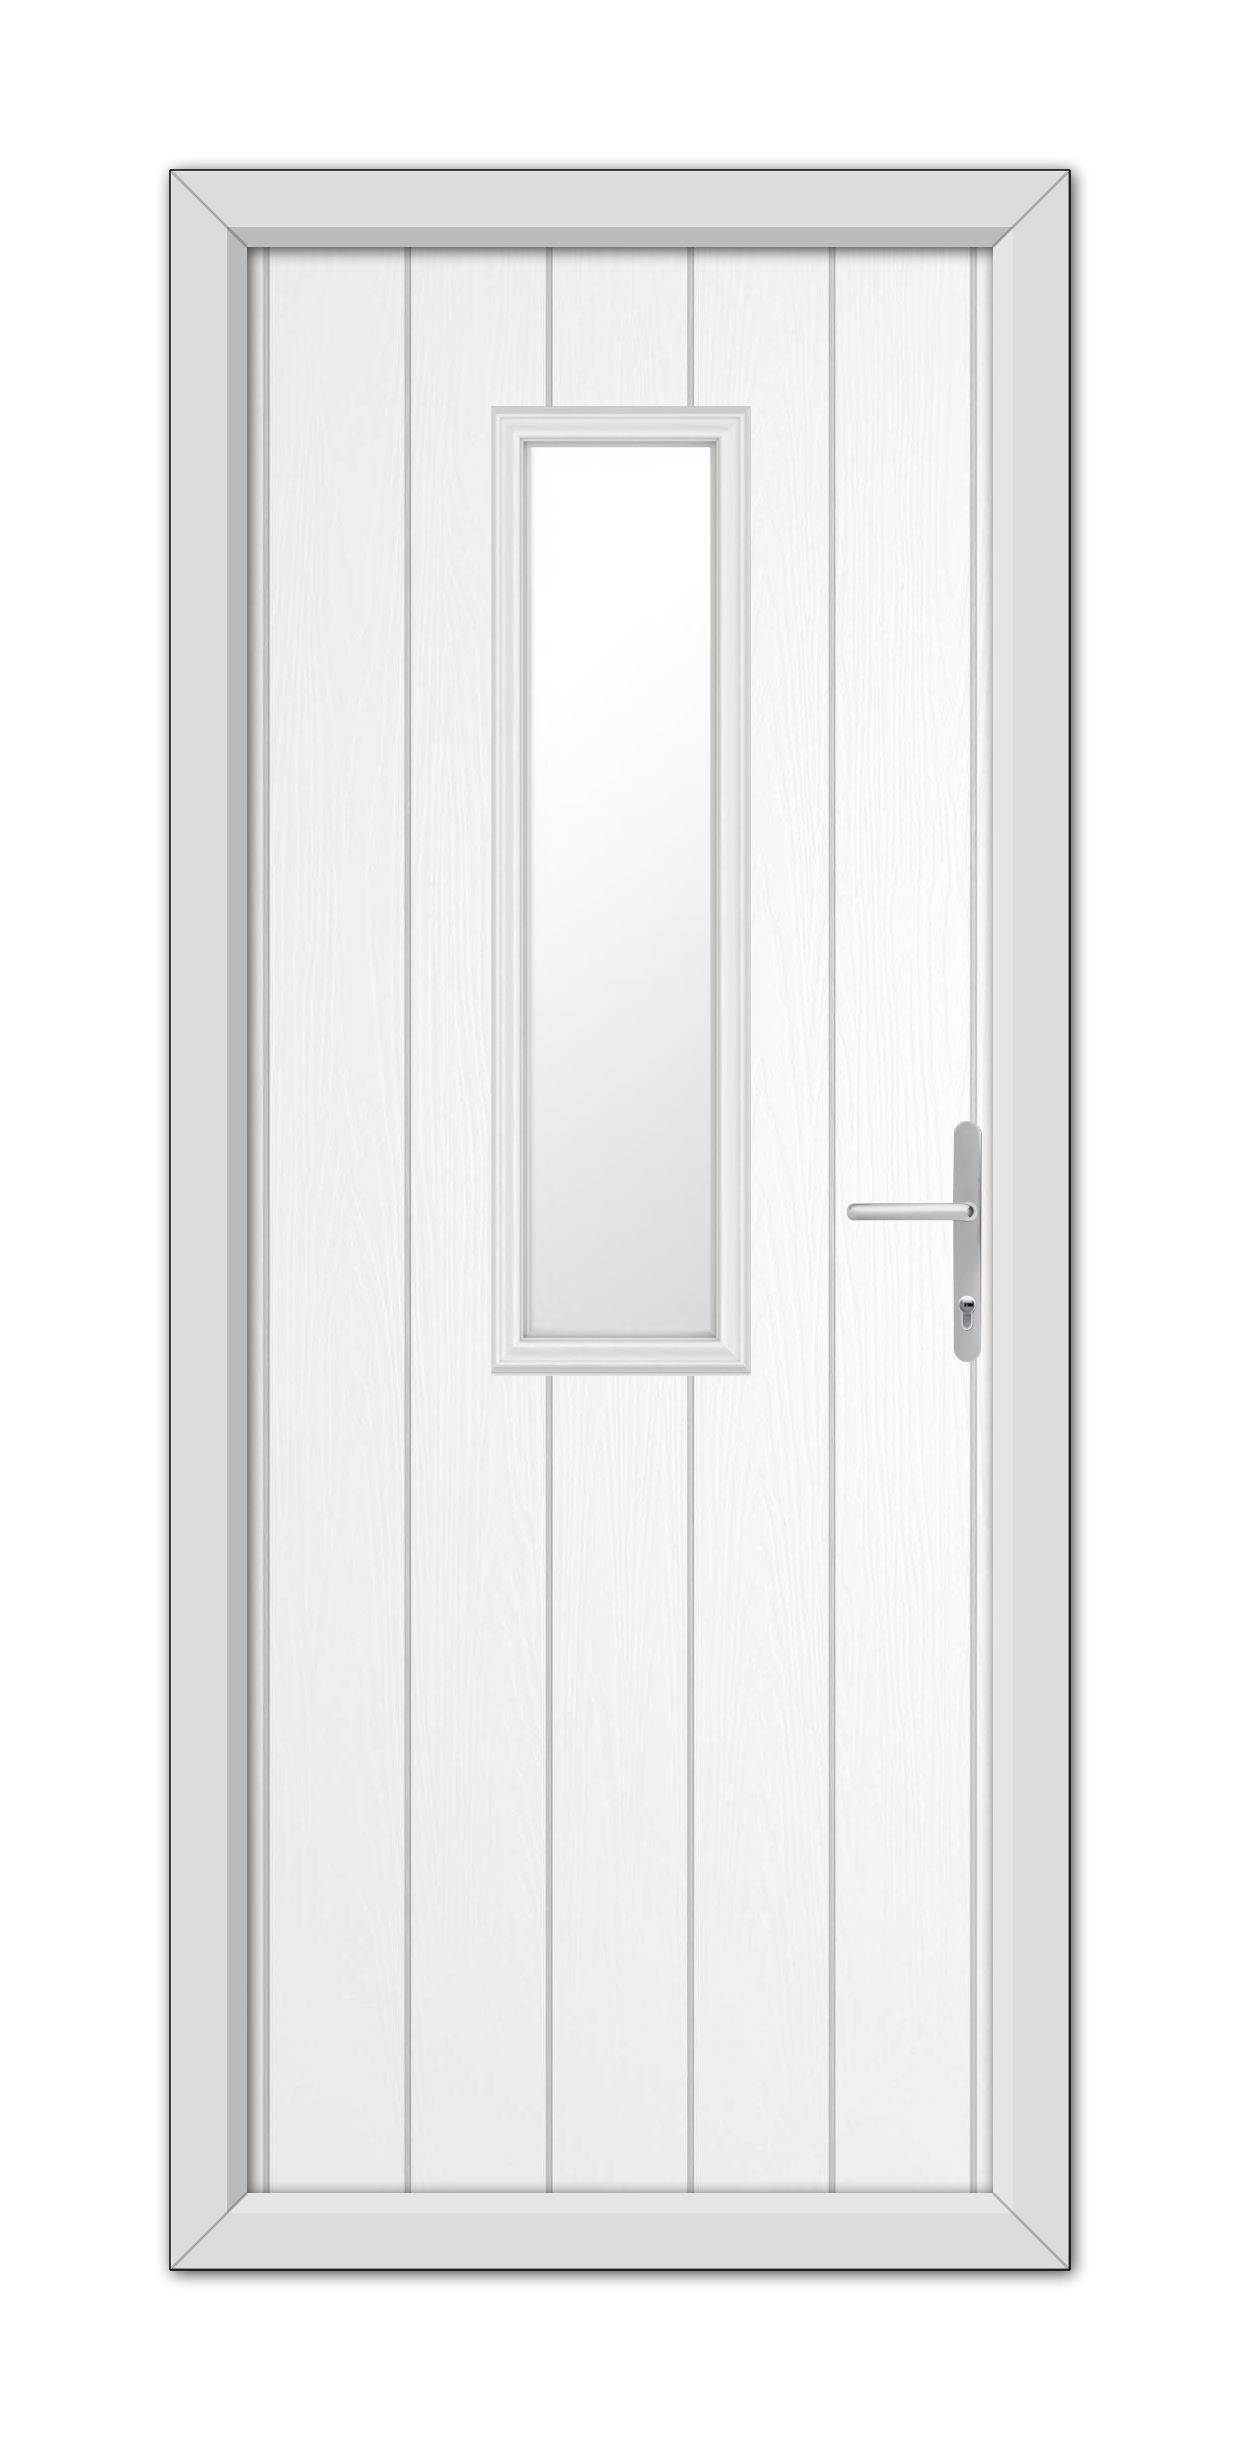 A White Mowbray Composite Door 48mm Timber Core with a vertical rectangular glass panel, framed by a simple grey door frame, with a silver handle on the right.